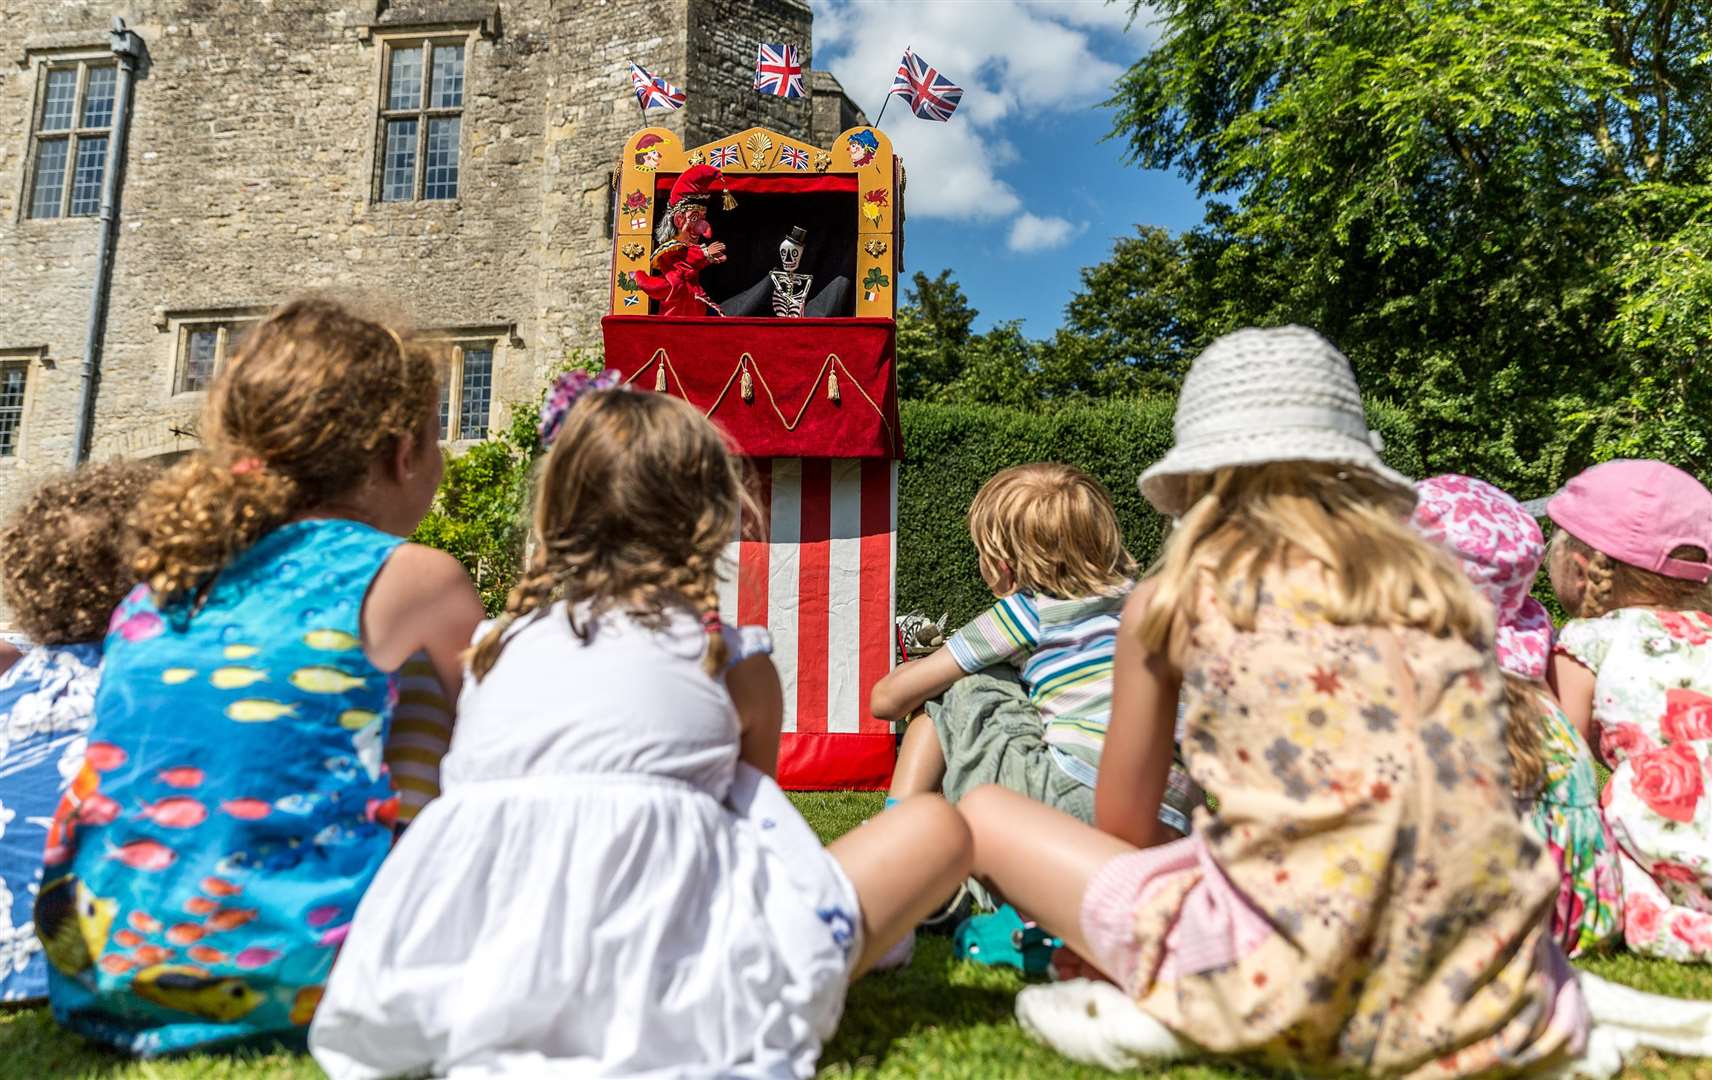 There will be Punch and Judy for children